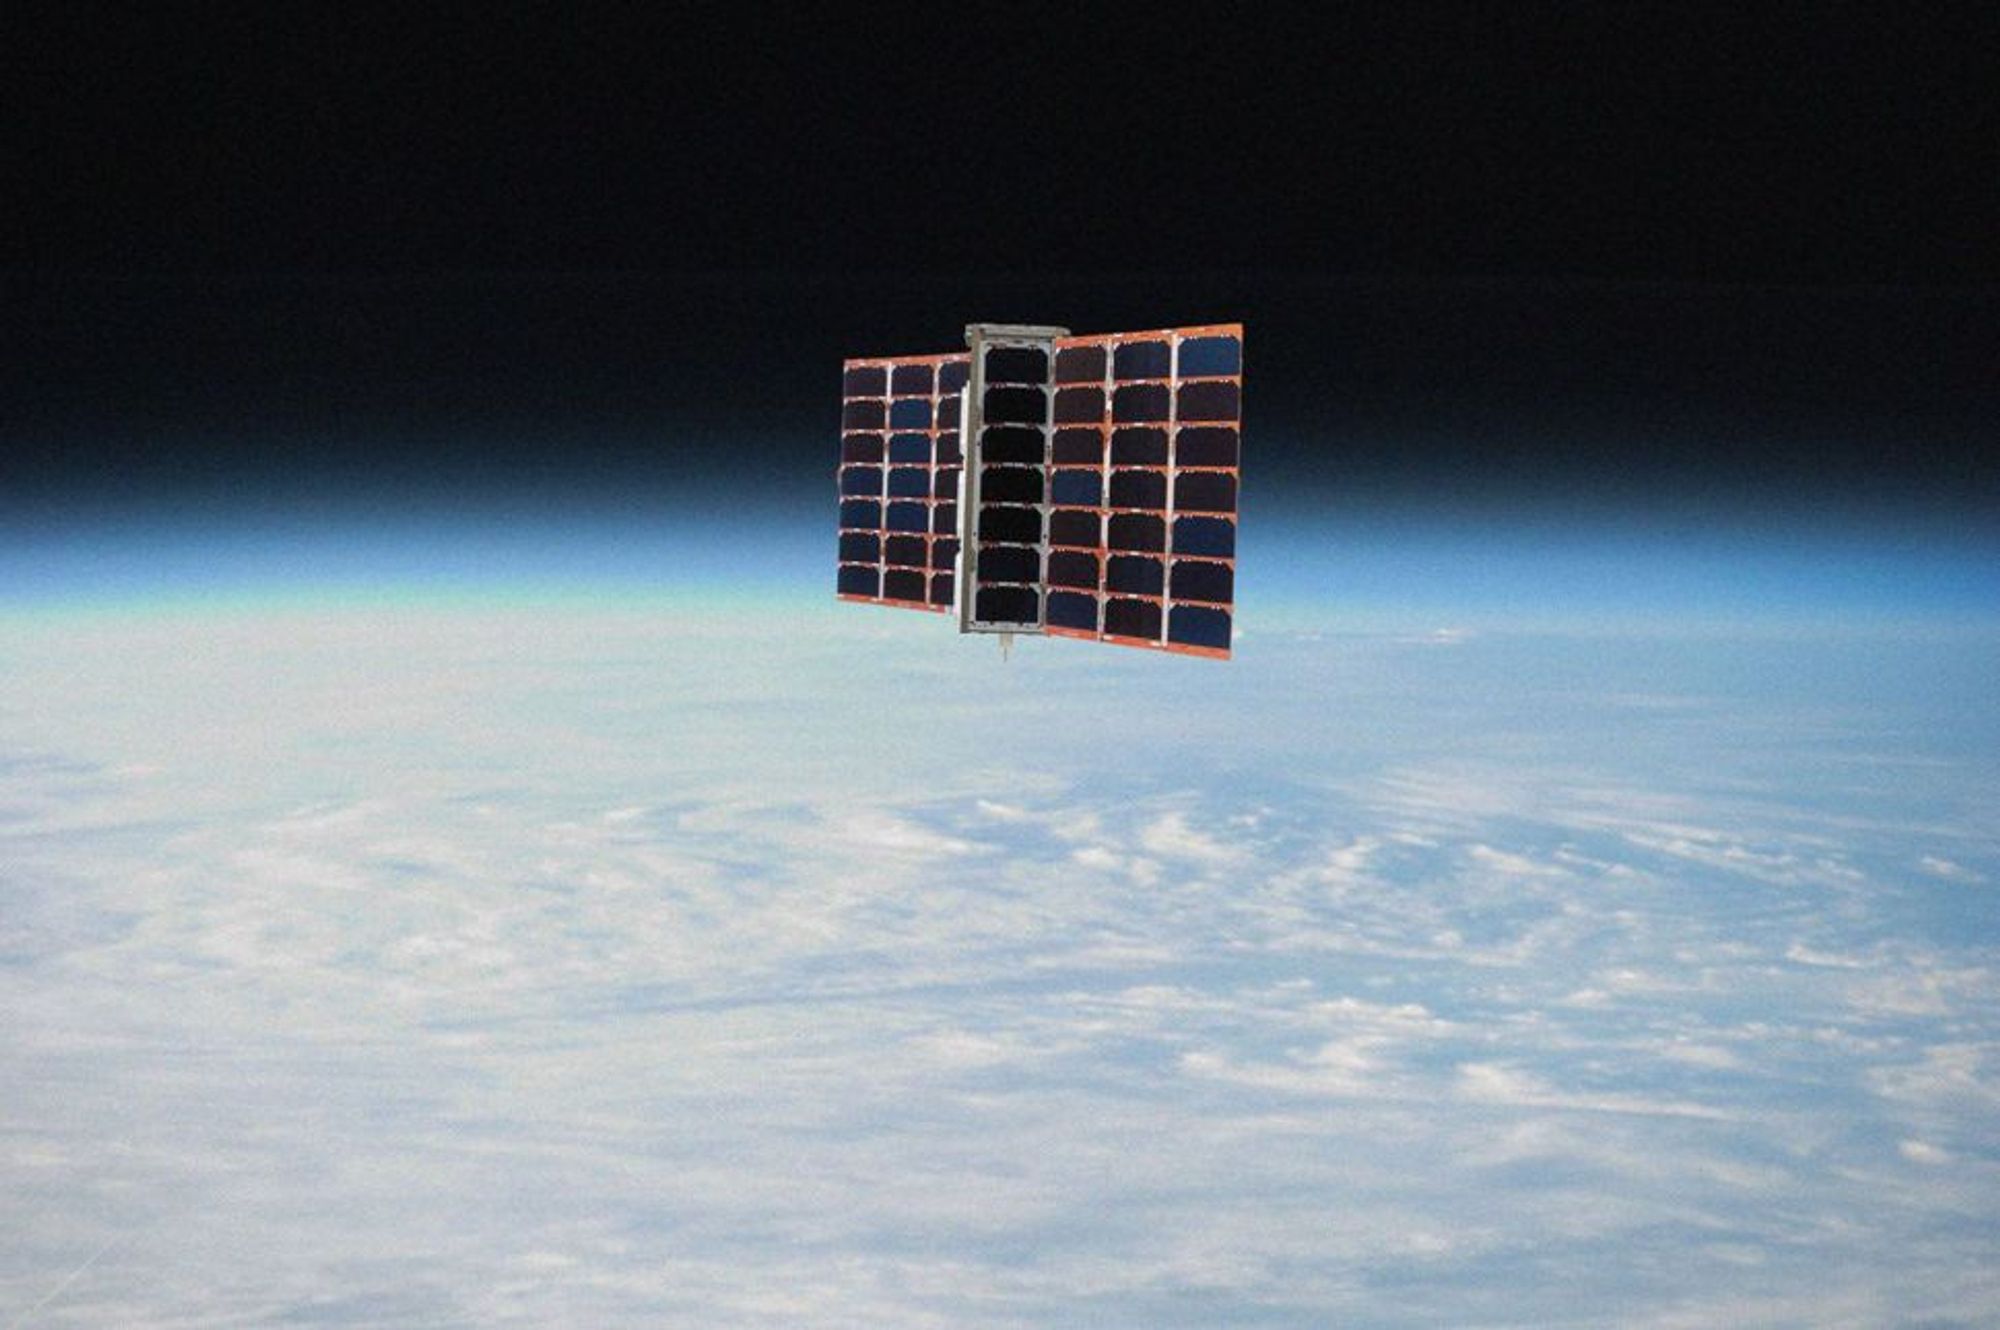 Tiny satellites are changing the way we explore our planet and beyond | Space